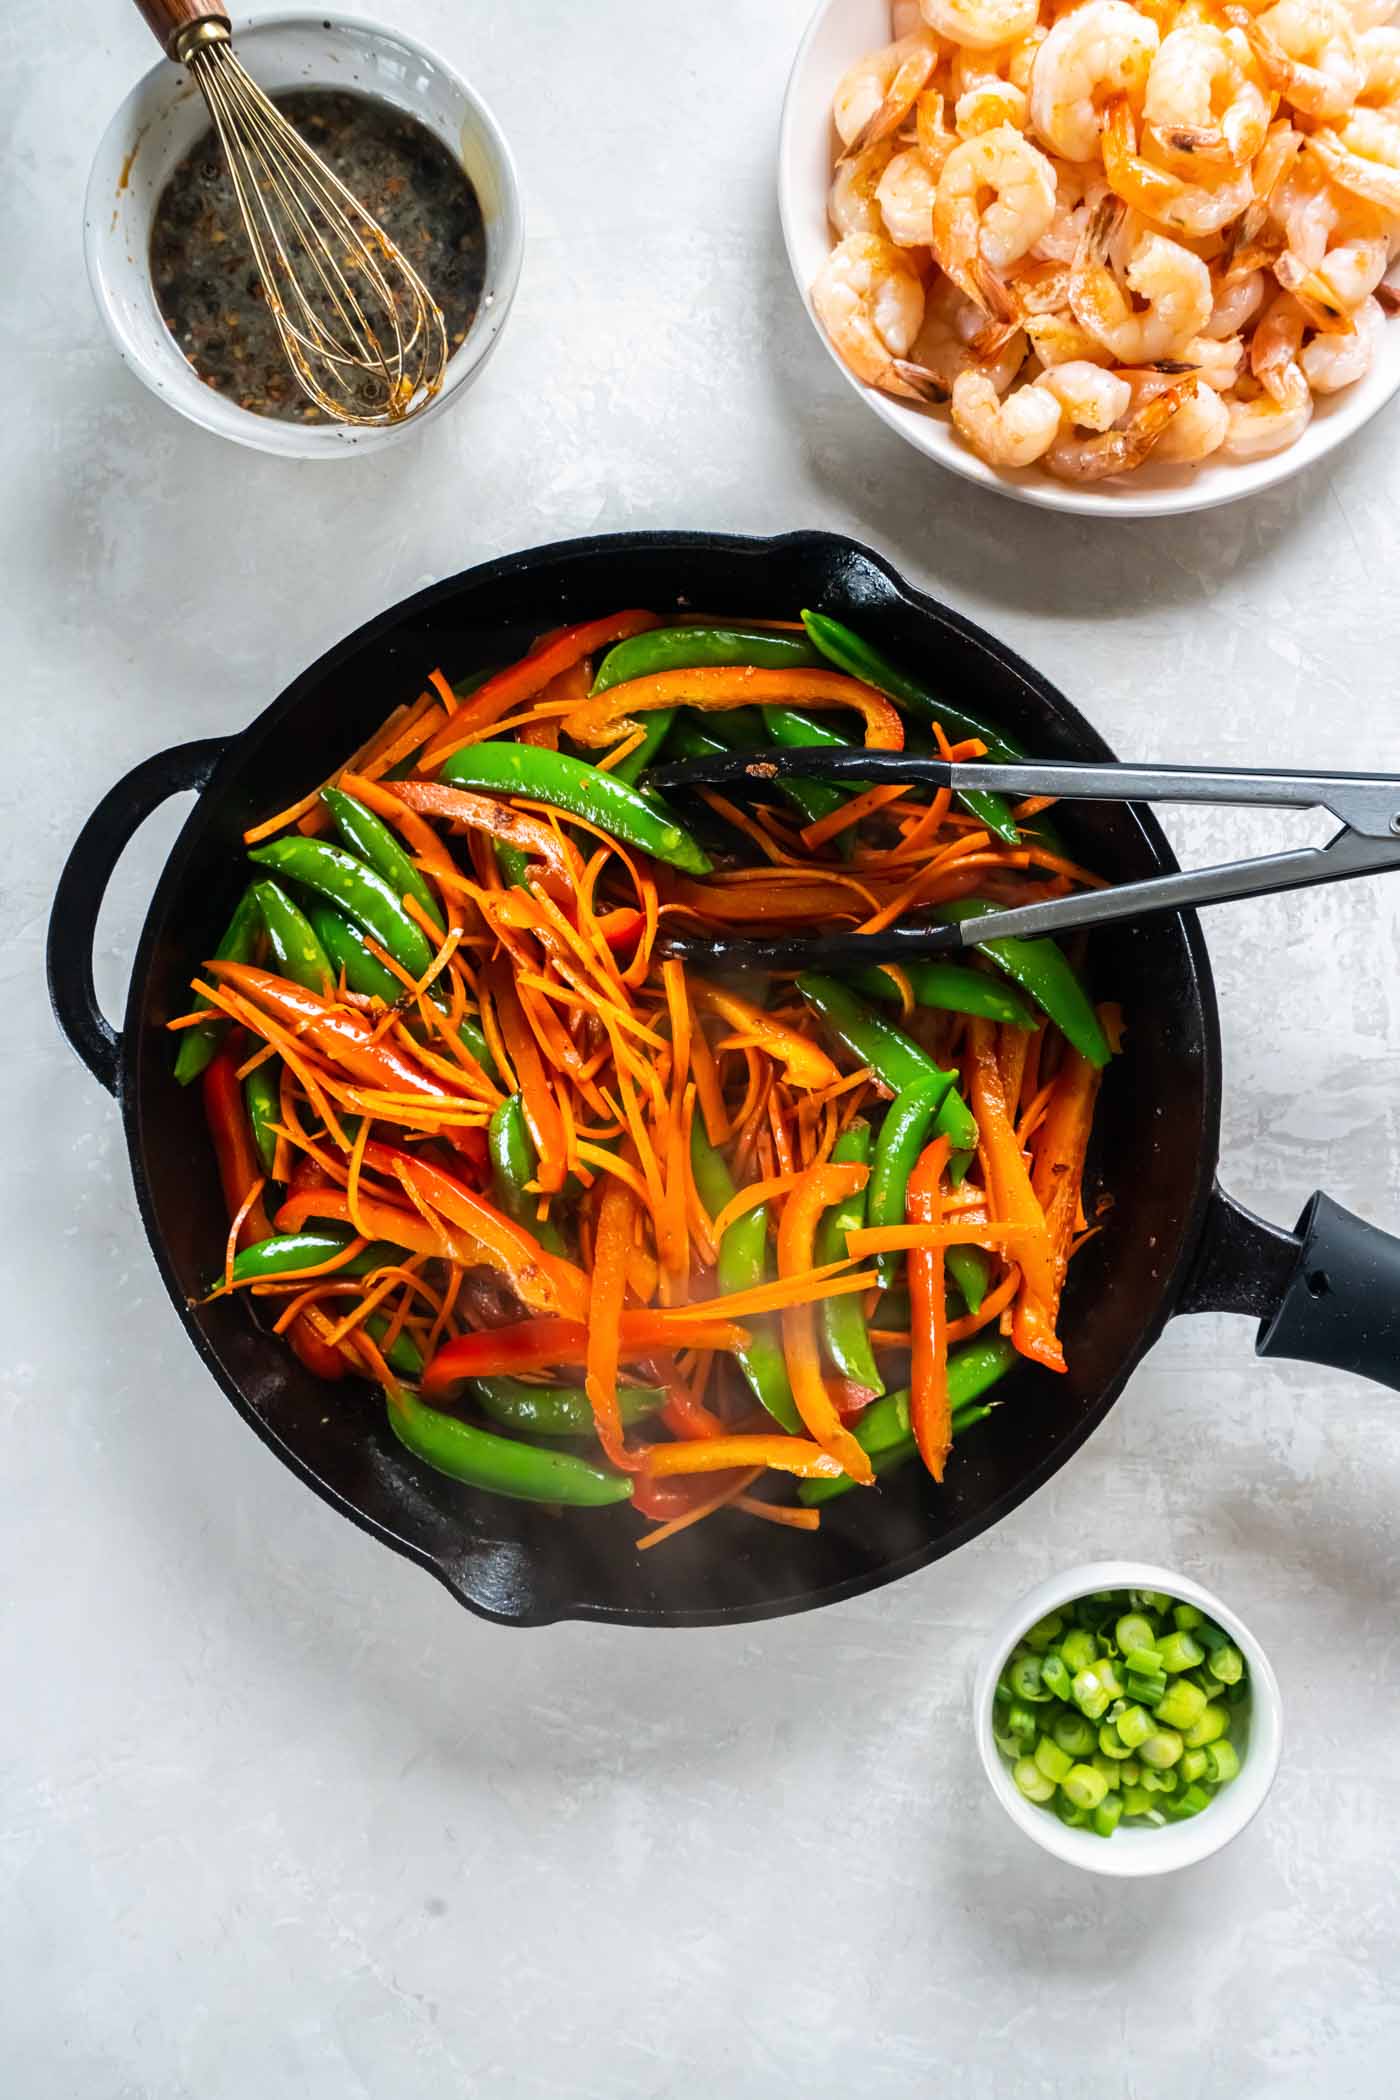 Stir frying carrots, bell peppers and snap peas in a skillet.